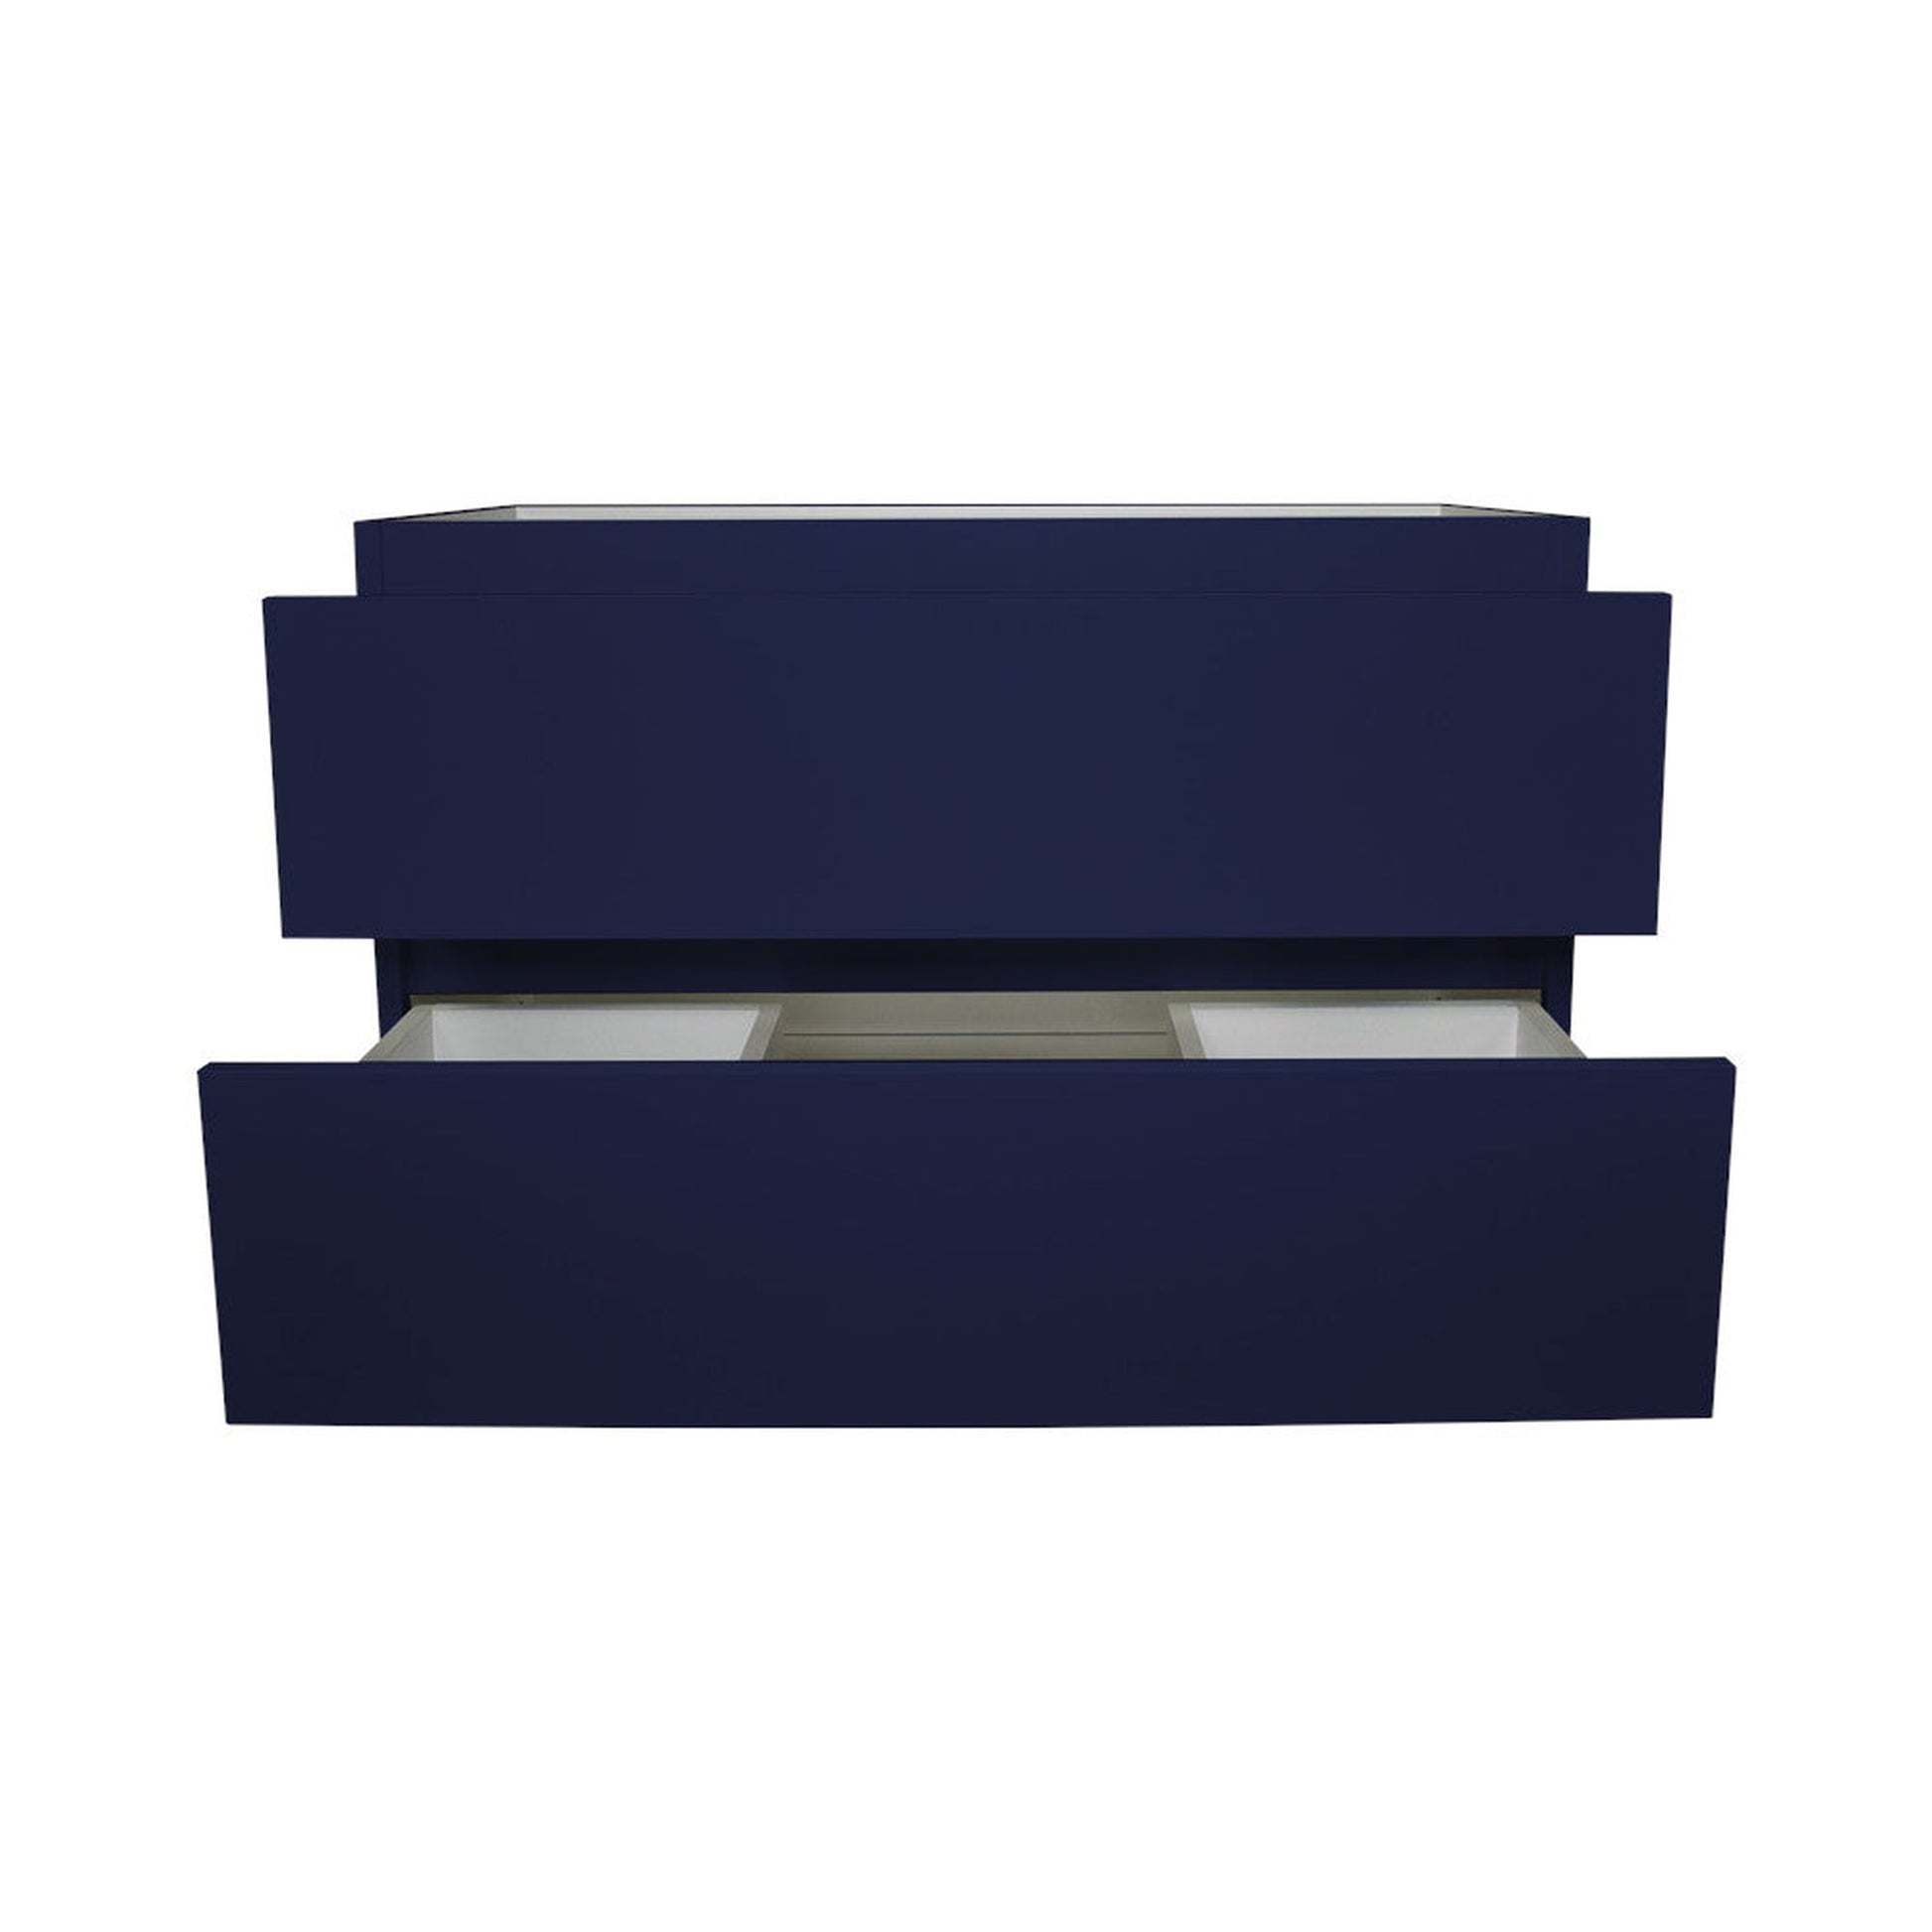 Volpa USA Salt 36" x 20" Navy Wall-Mounted Floating Bathroom Vanity Cabinet with Drawers